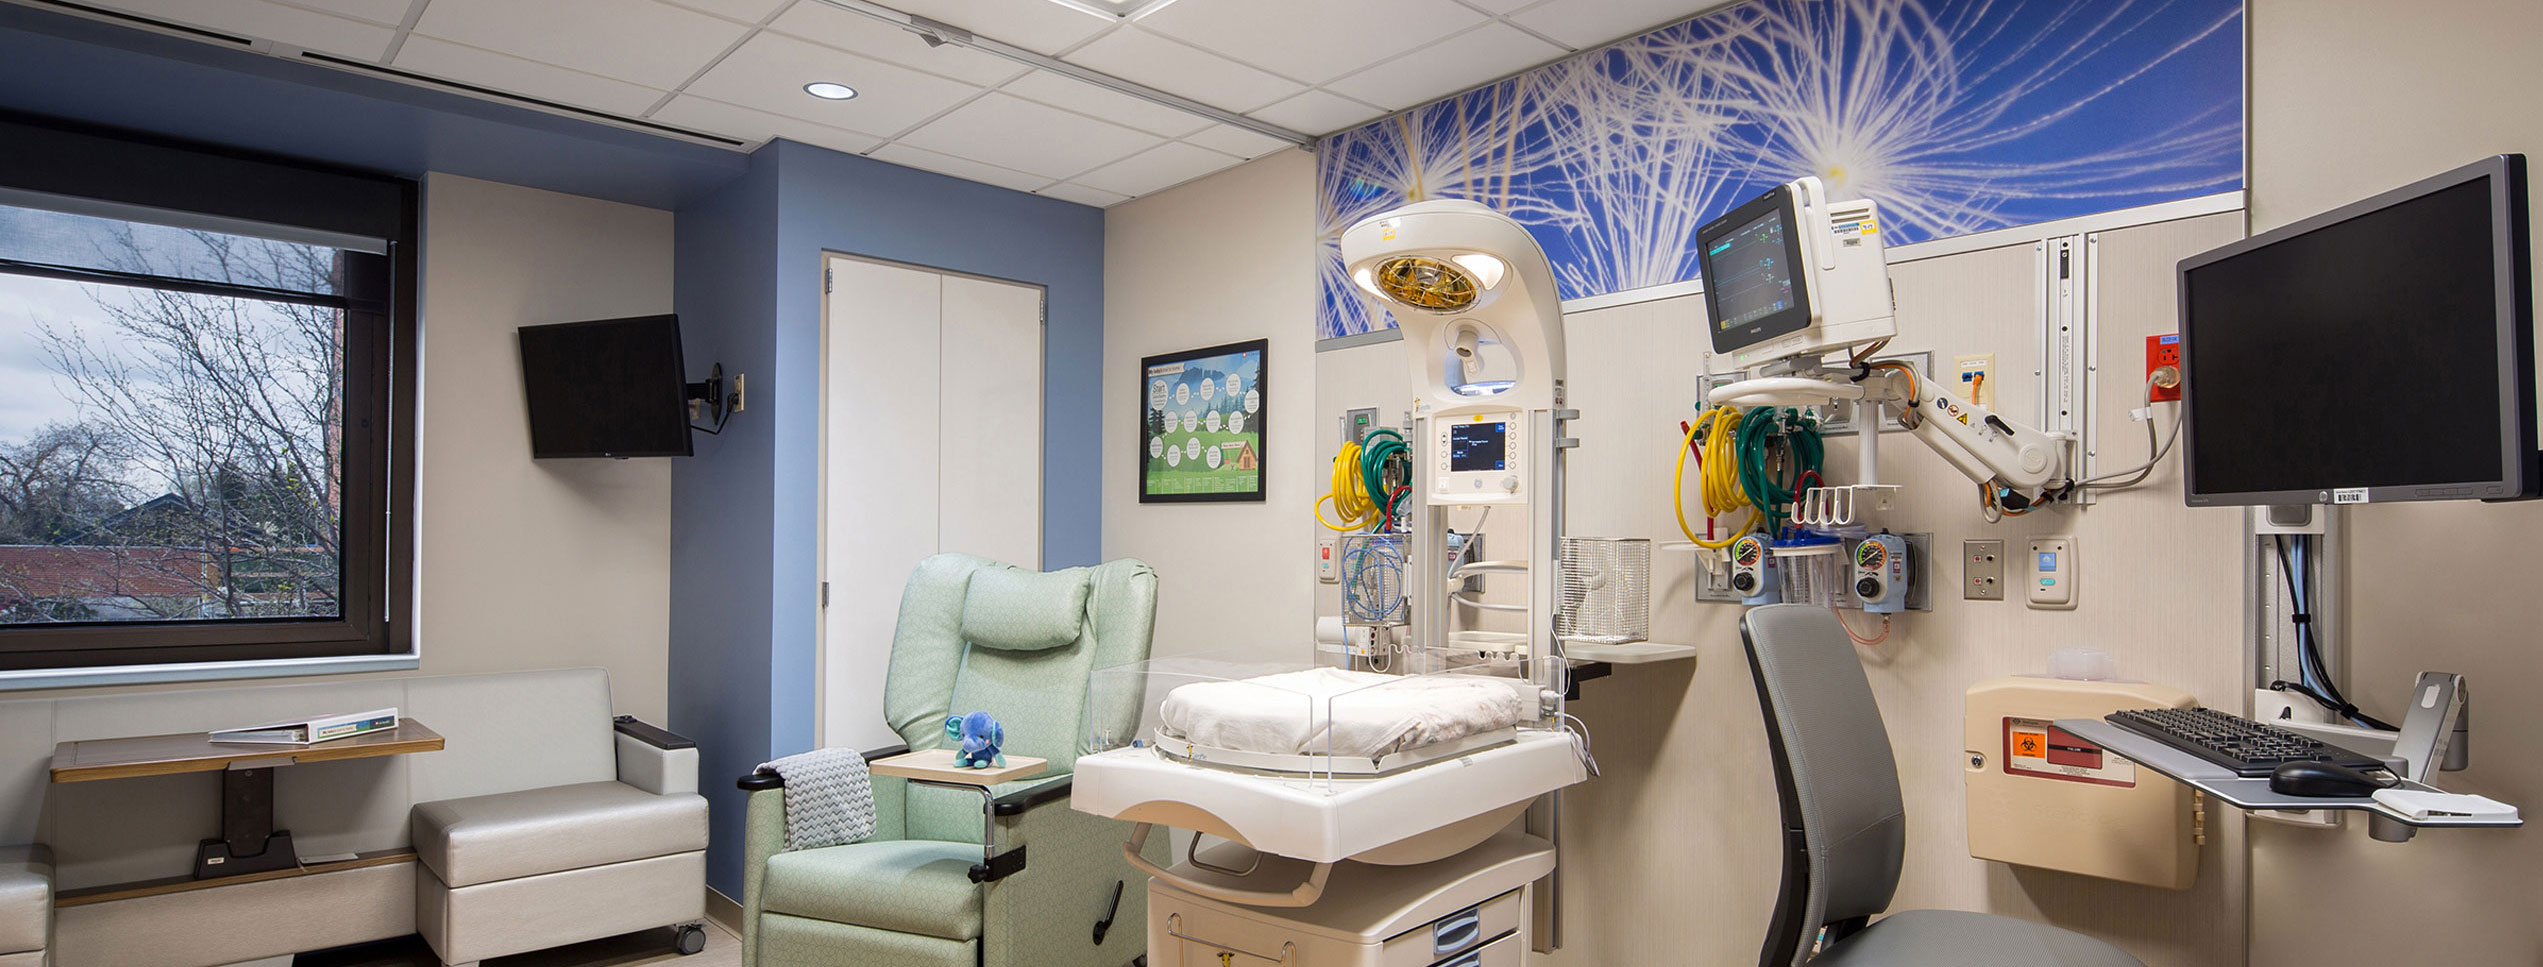 brand new and finished construction of NICU room